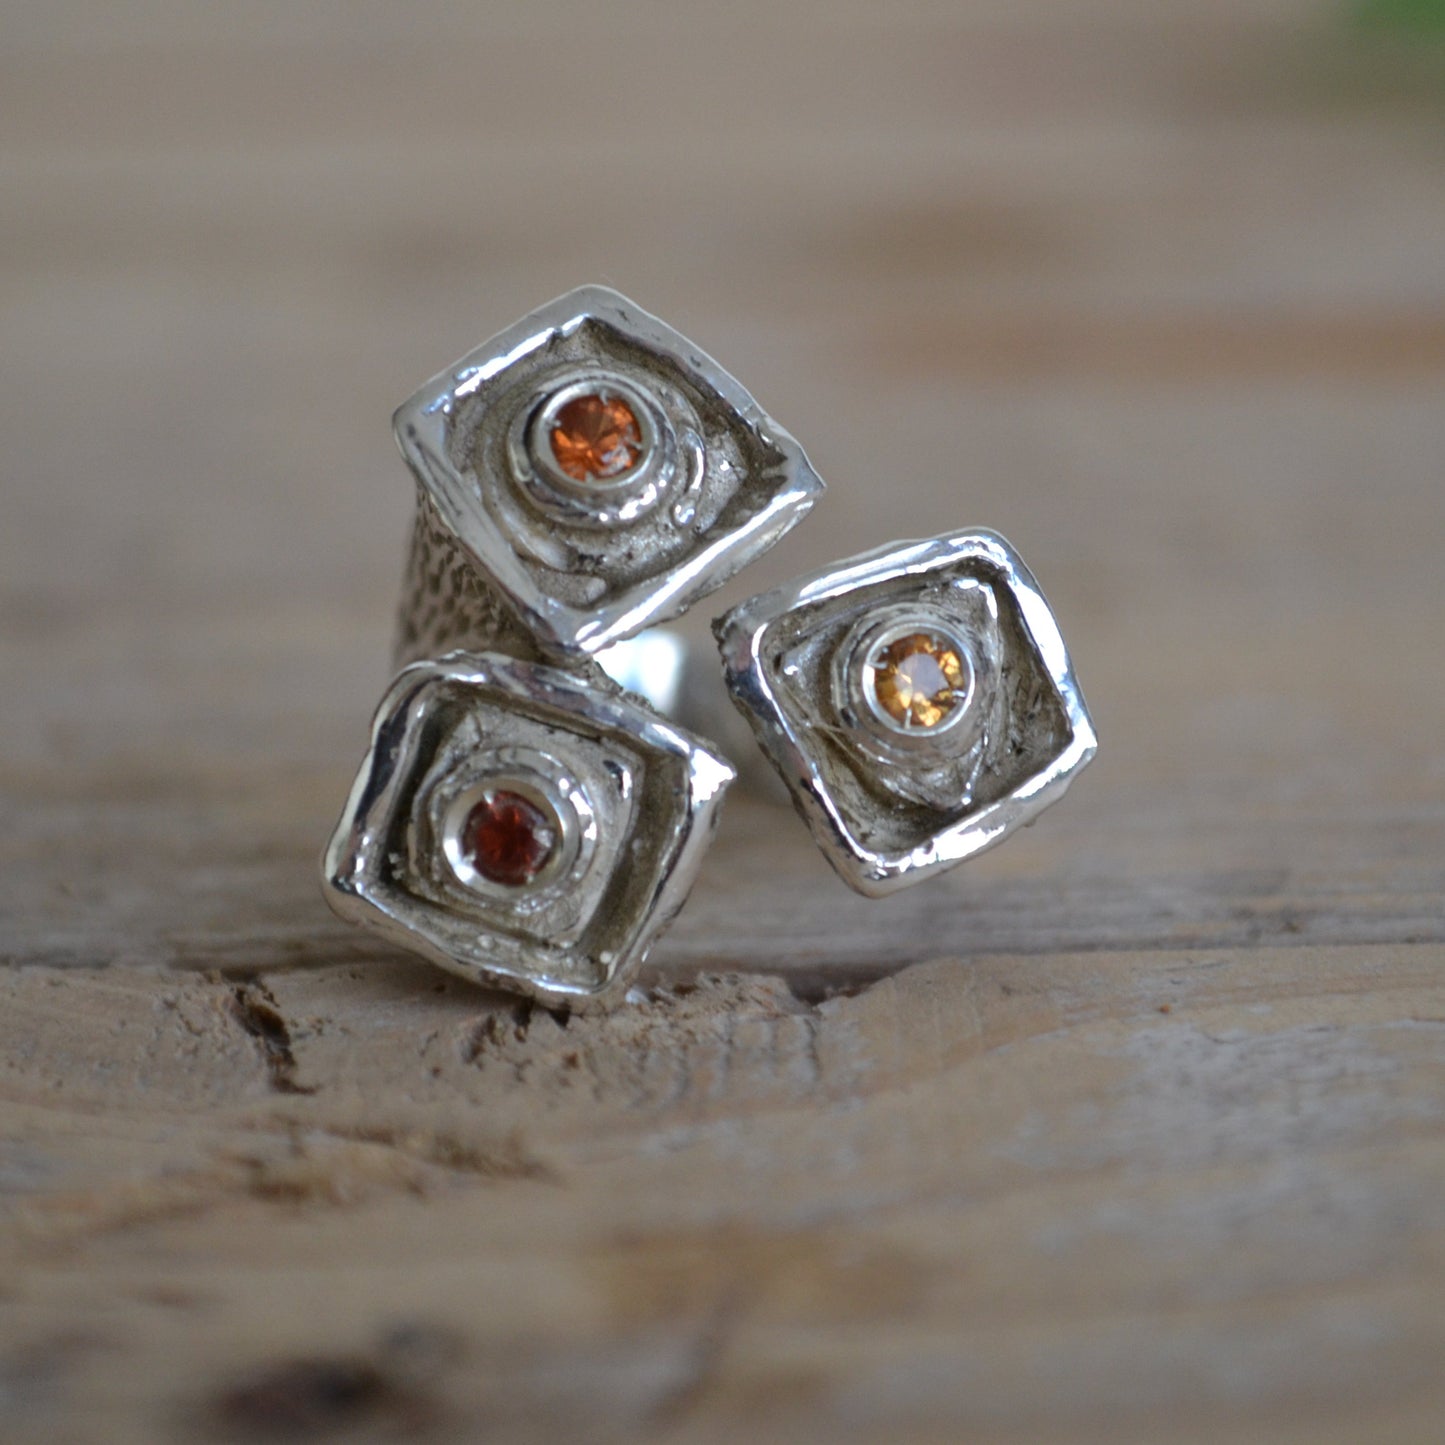 Triple Contrariè Ring with Orange/Yellow Sapphires